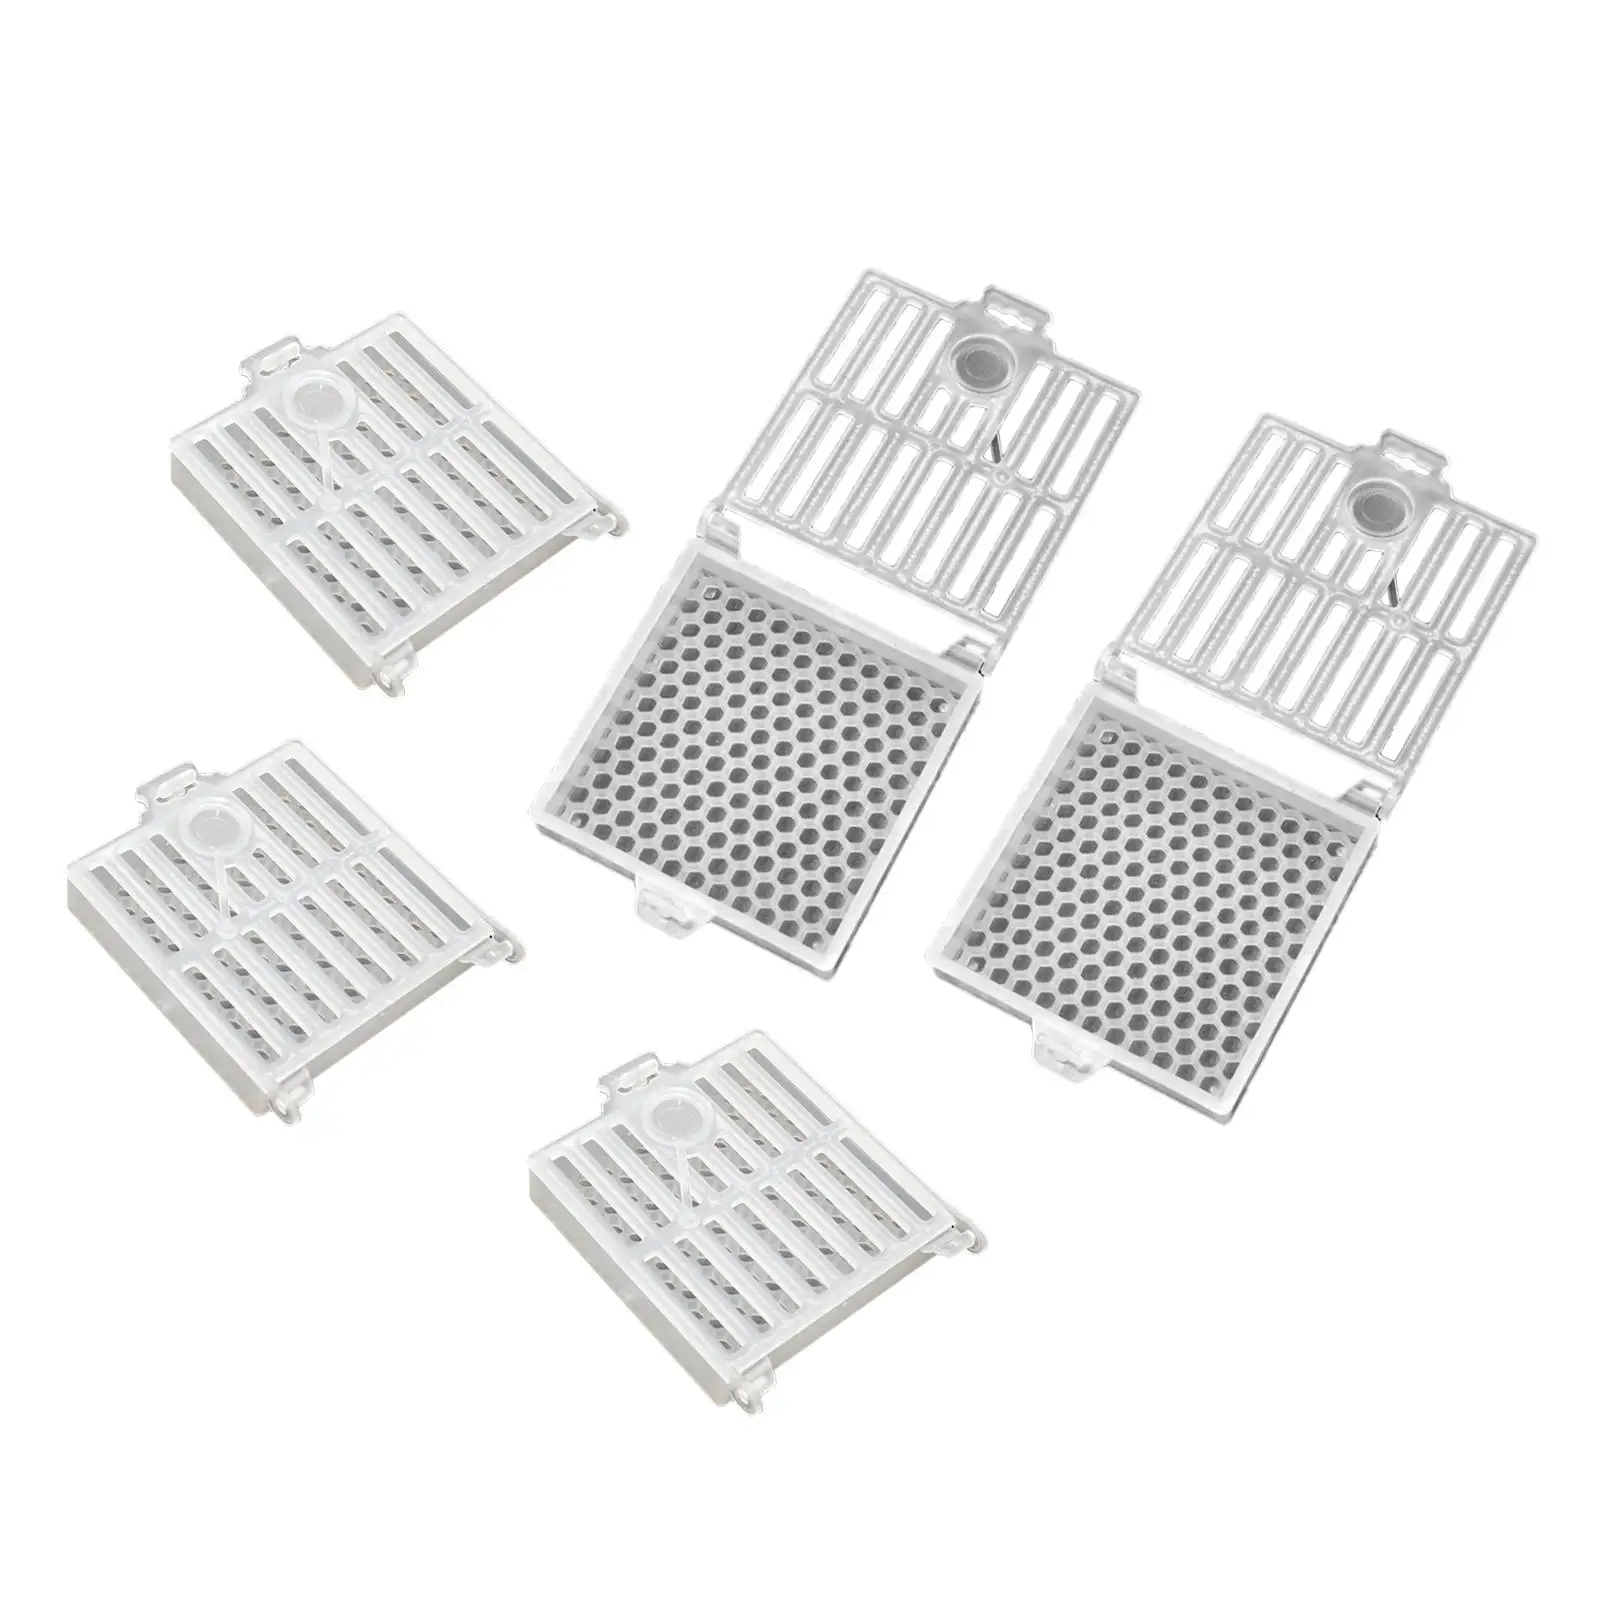 5 Pieces Queen Cage Multifunction Rearing Tools W/ Comb Box Durable